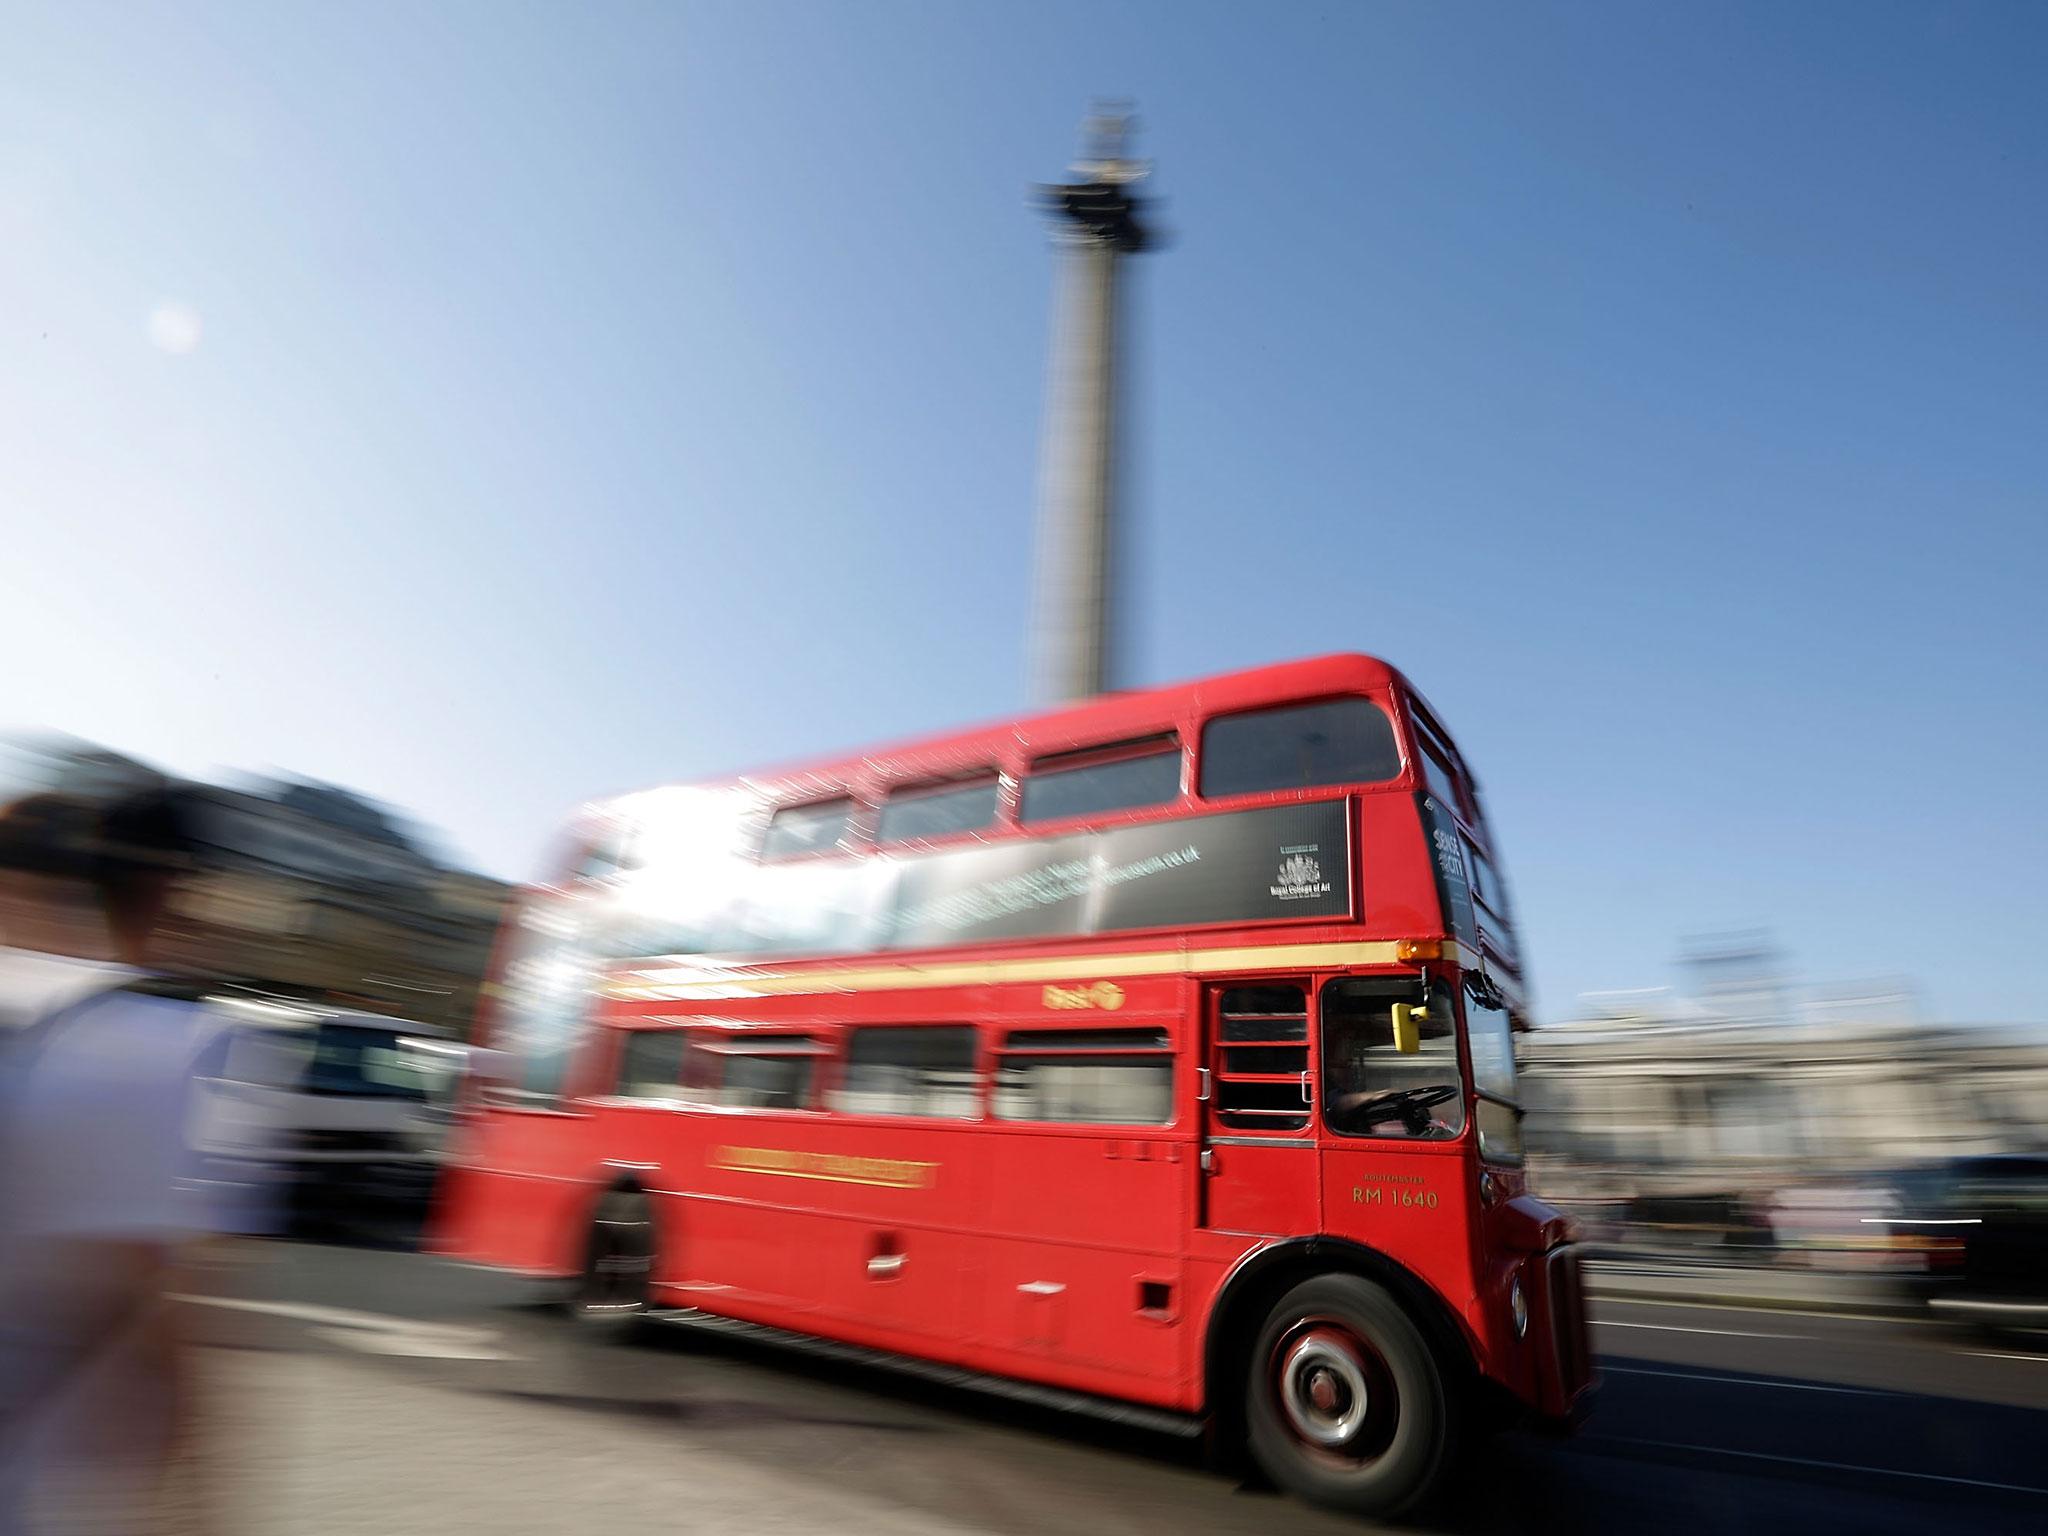 Violence broke out on a bus in East London